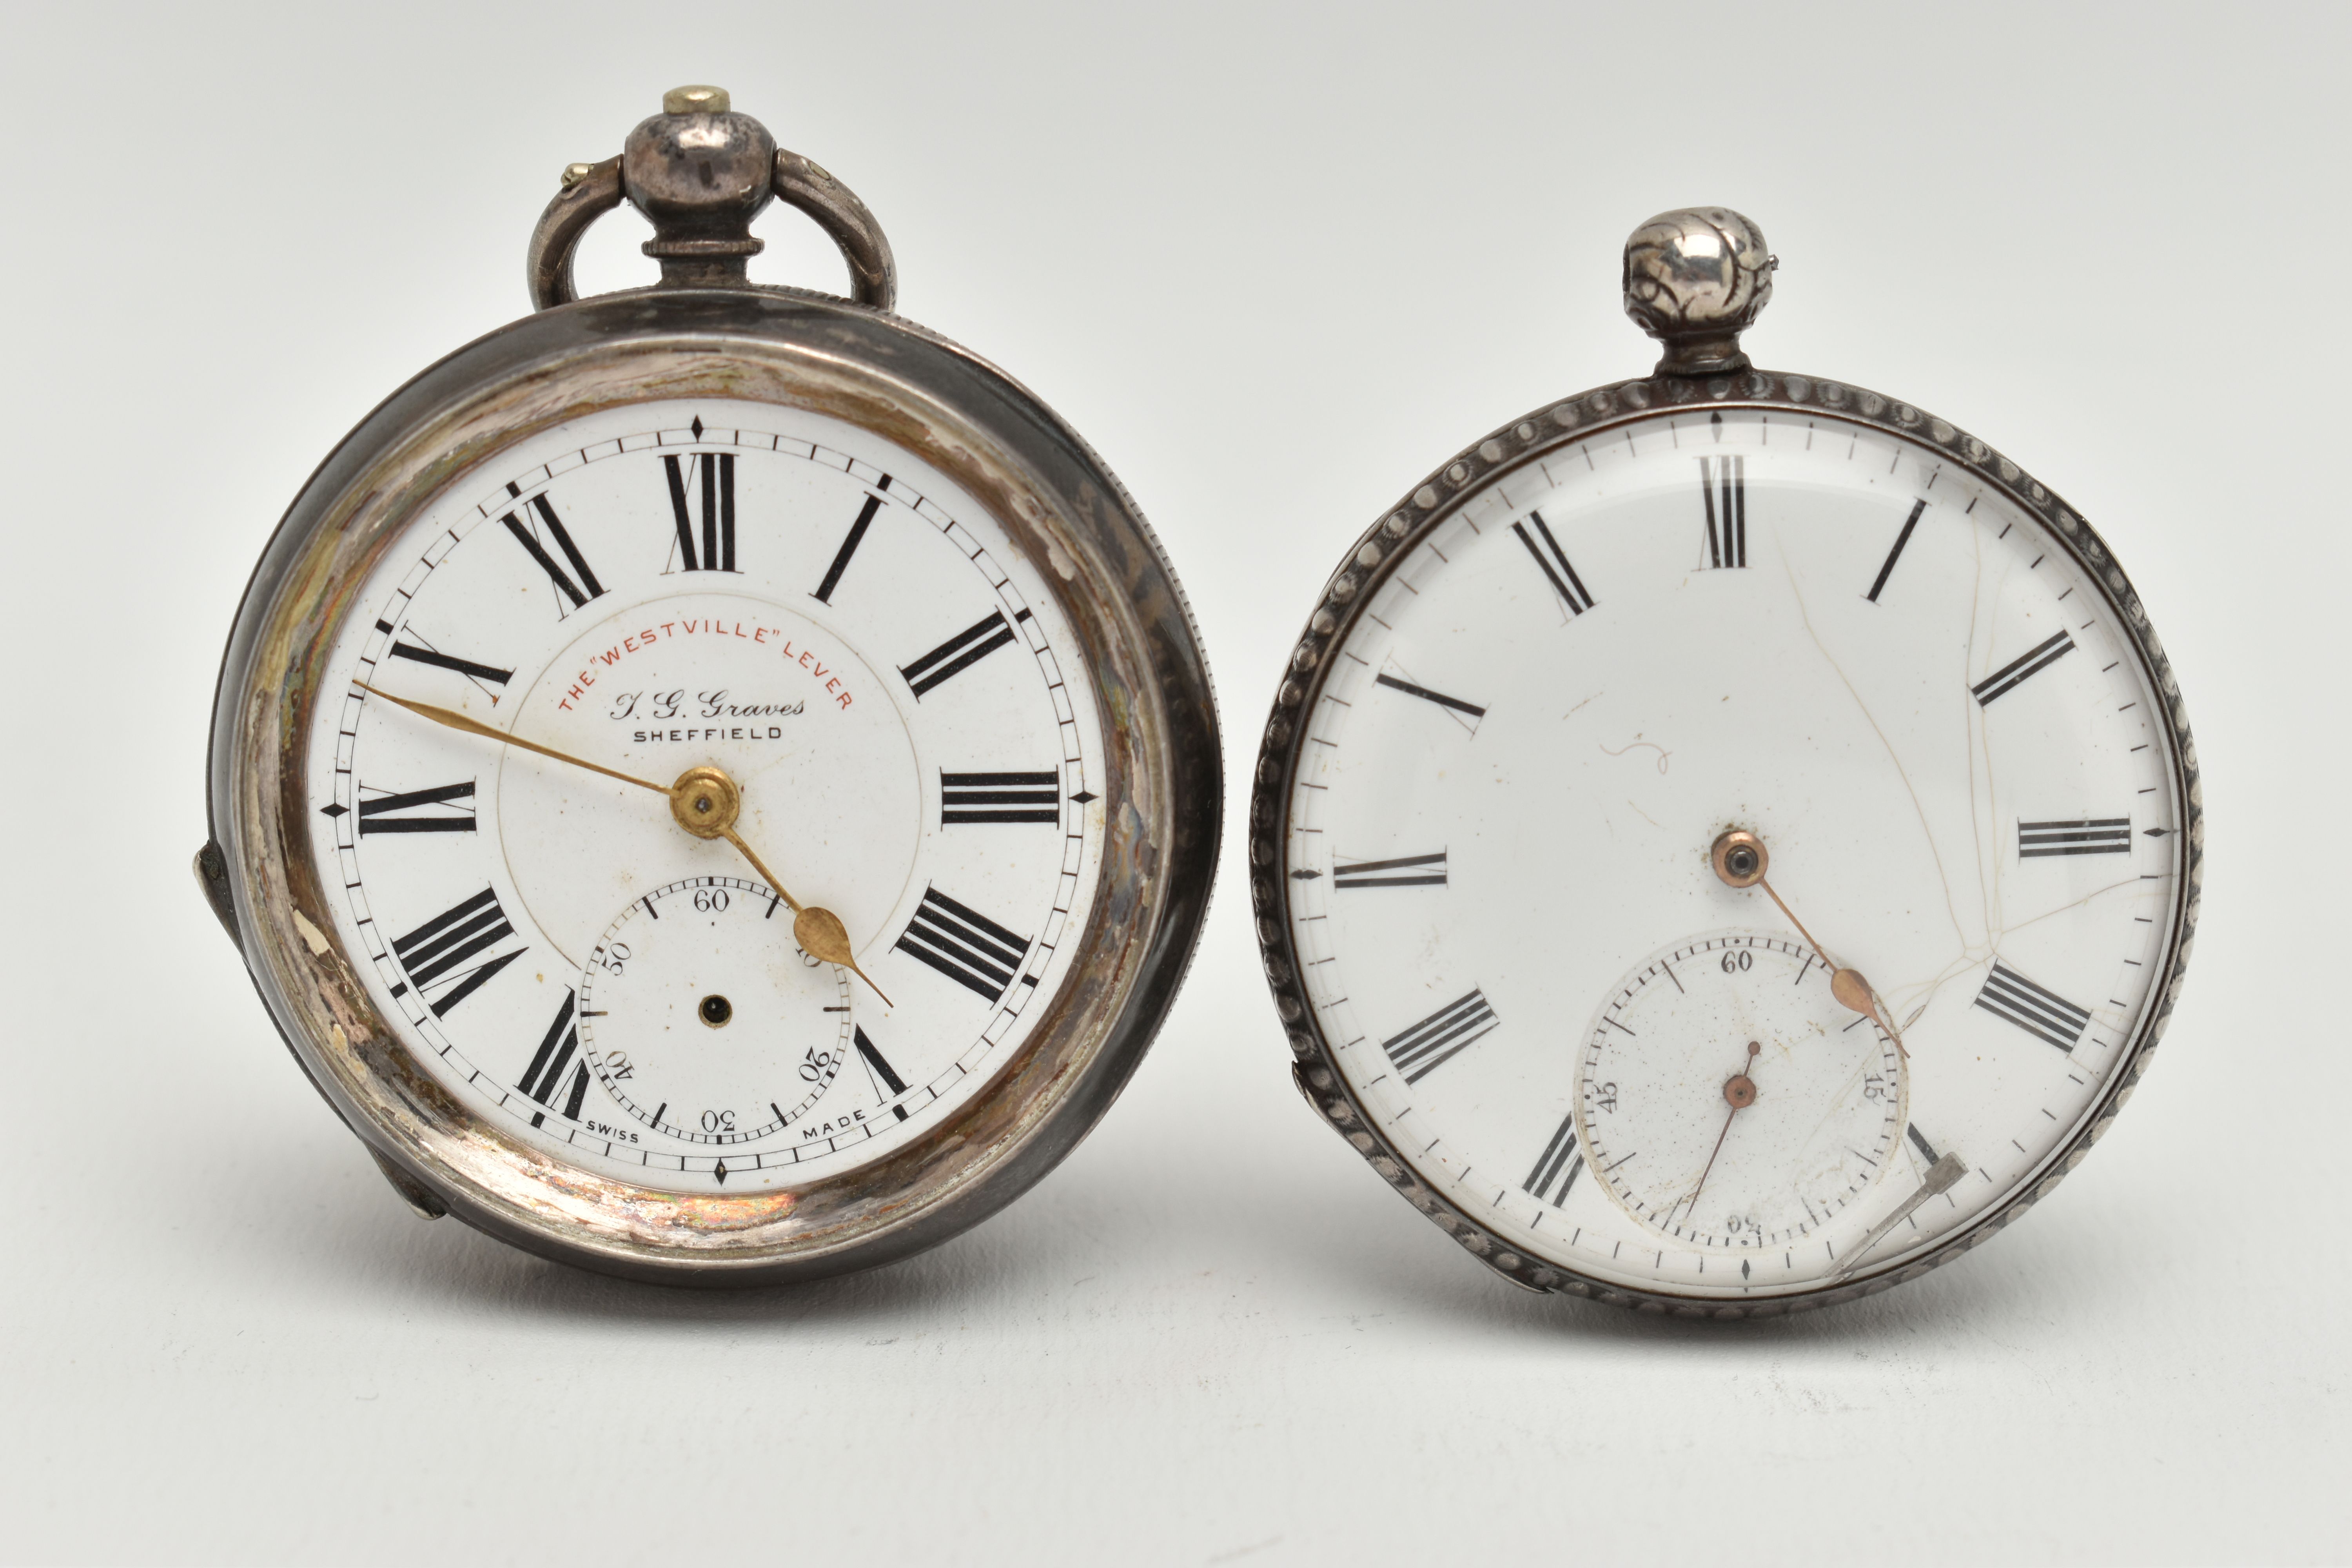 TWO OPEN FACE POCKET WATCHES, the first an AF white metal, open face pocket watch, (missing glass